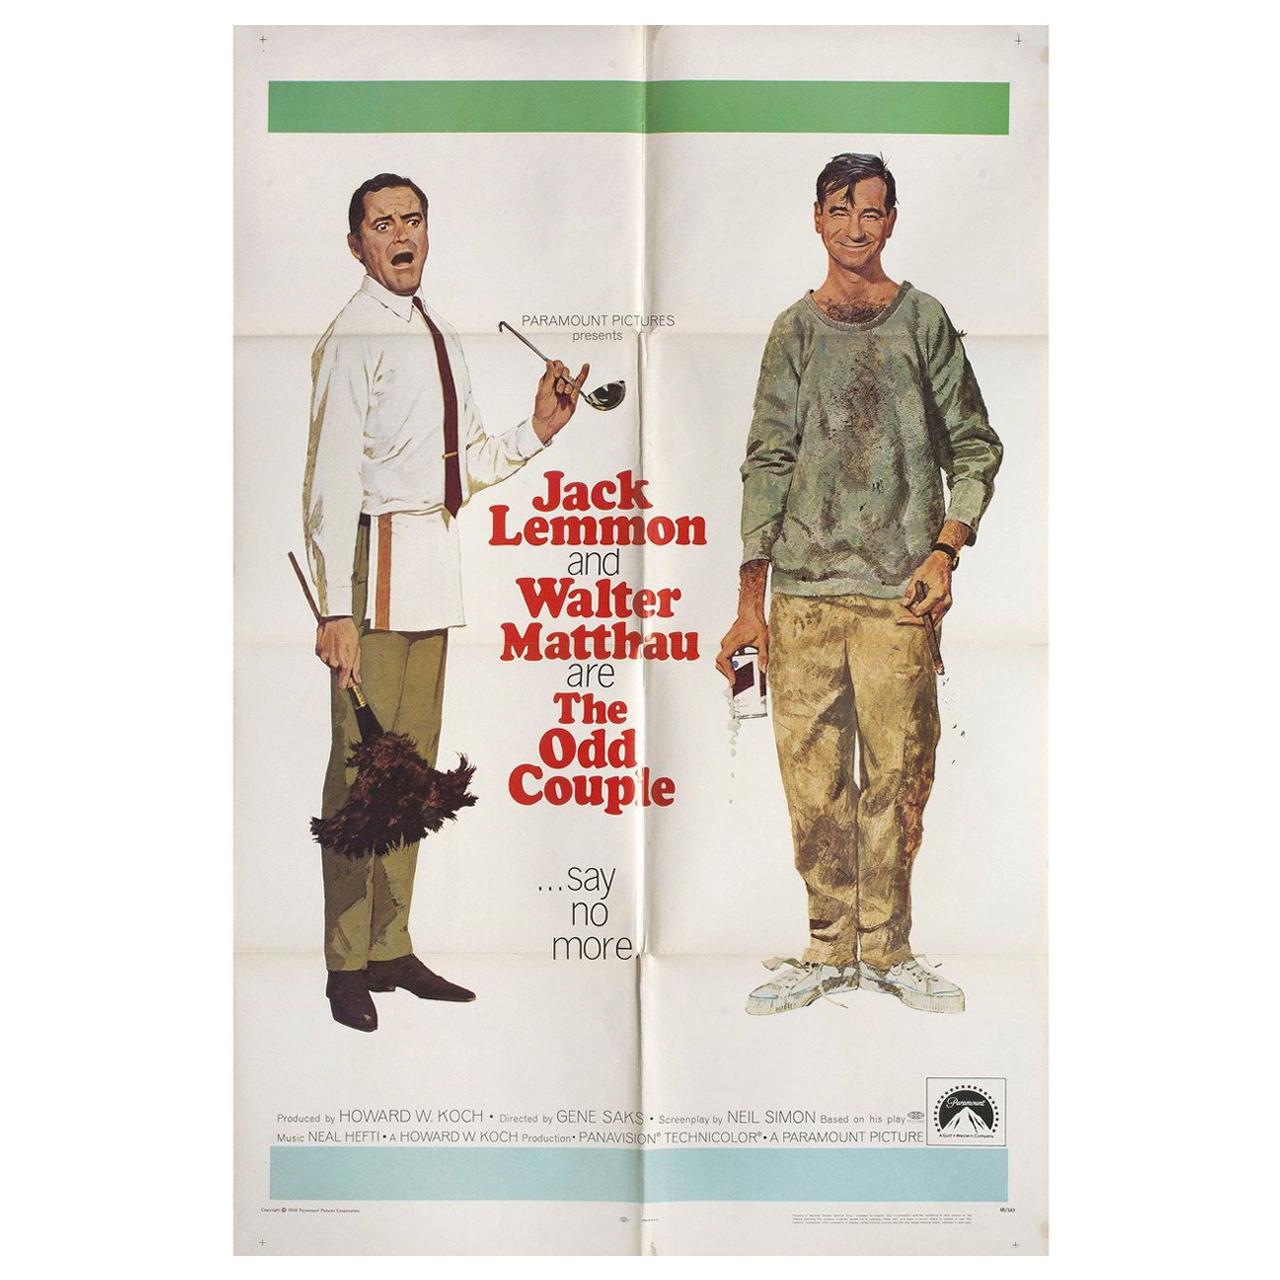 The Odd Couple 1968 U.S. One Sheet Film Poster